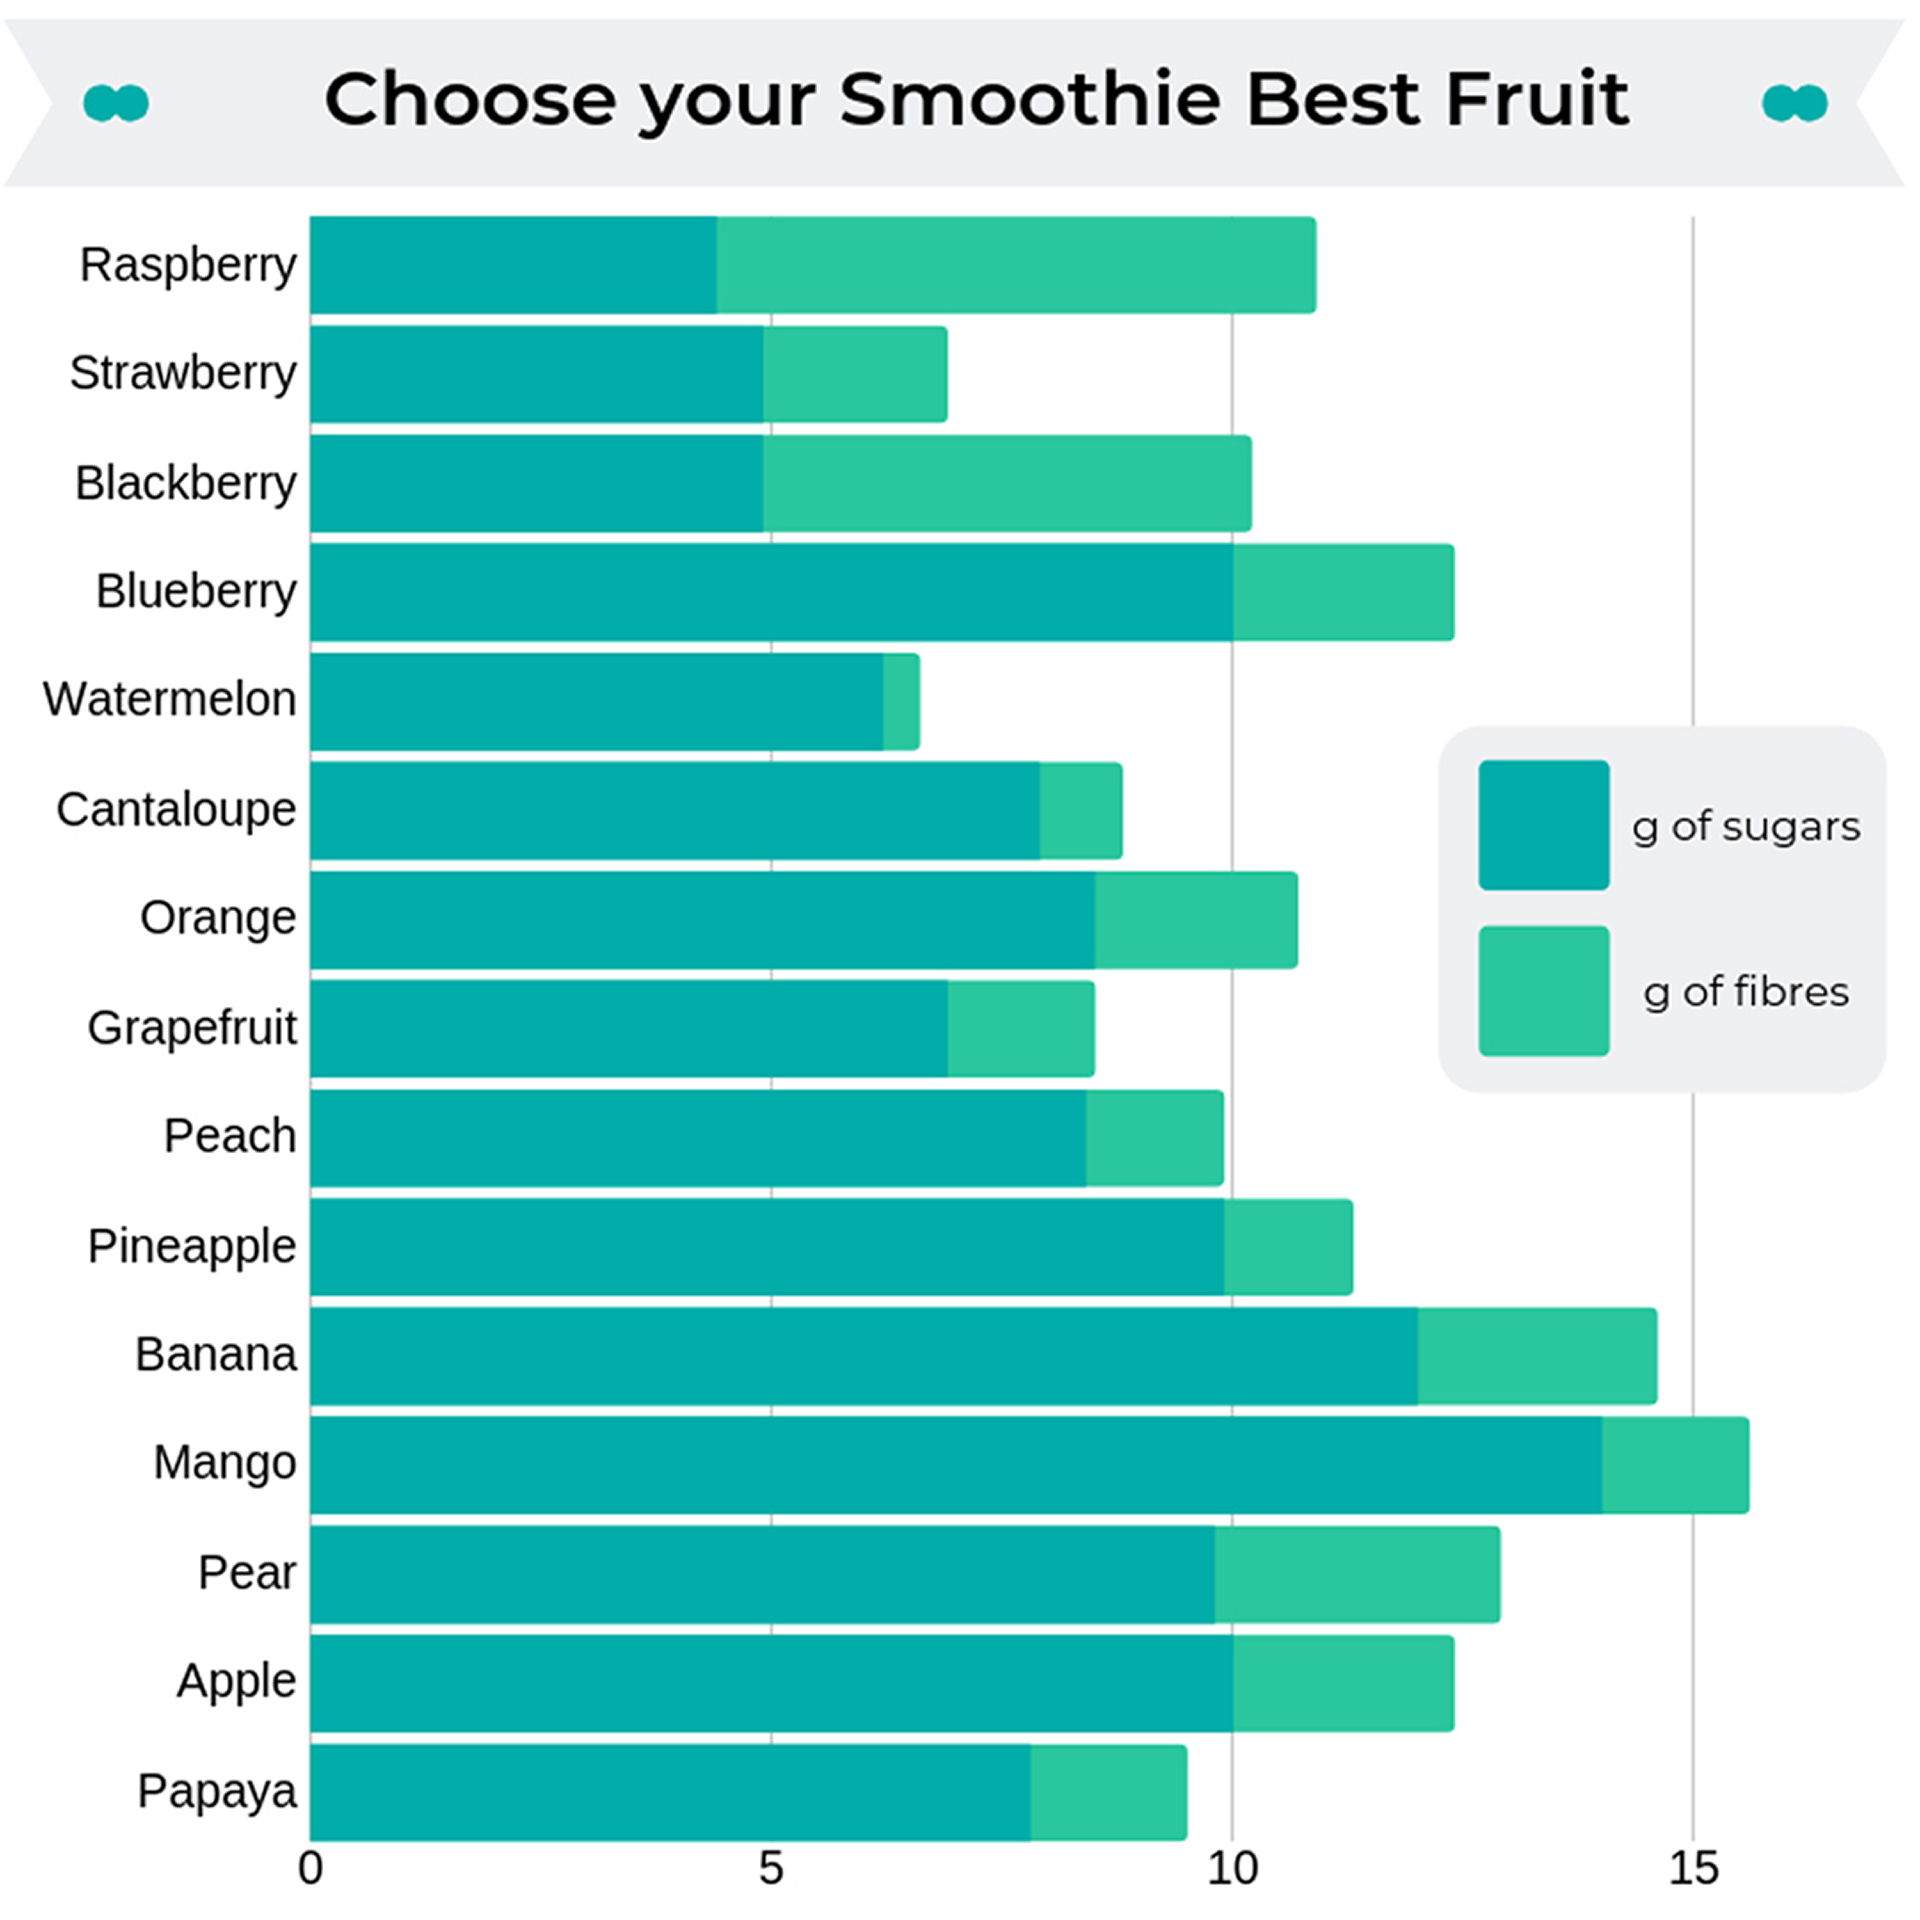 which is the best fruit for smoothies